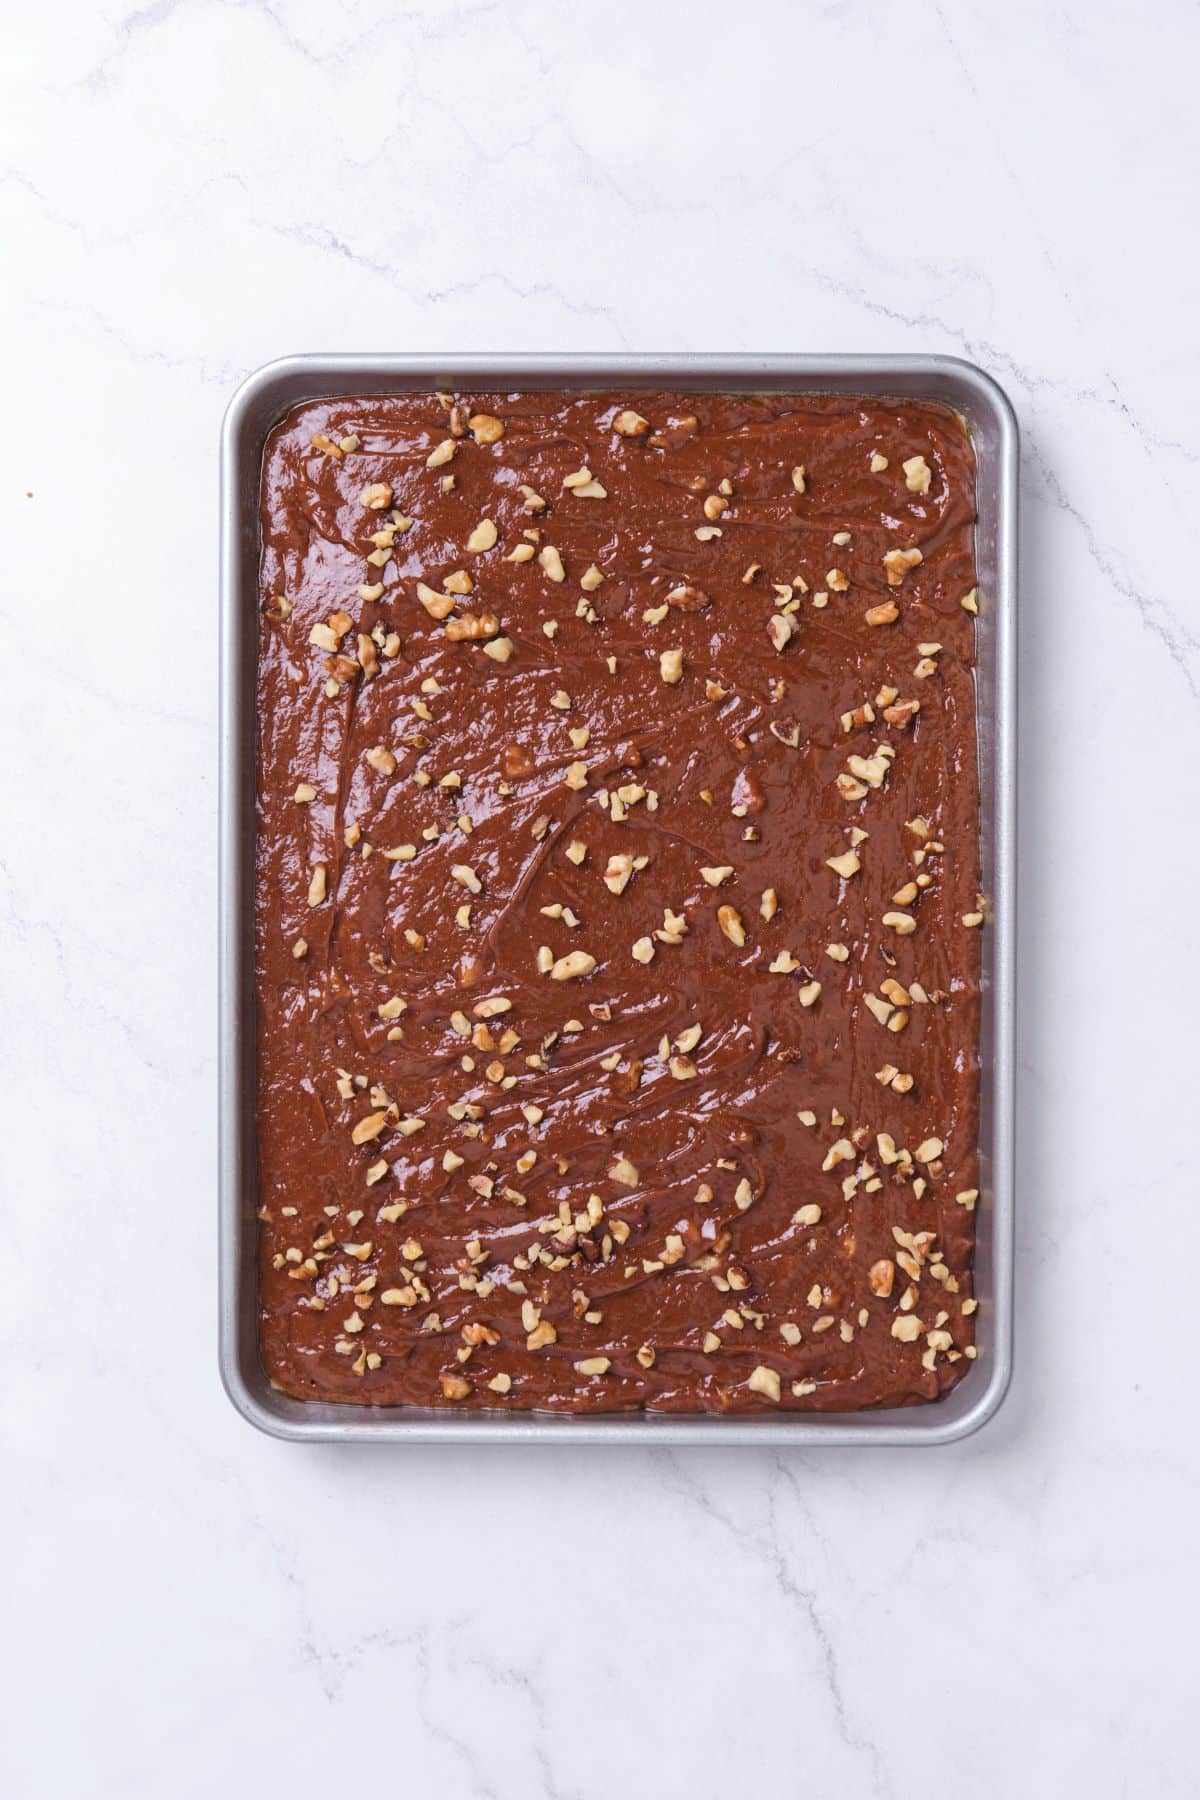 Chocolate cake batter in a sheet pan with nuts sprinkled on top.